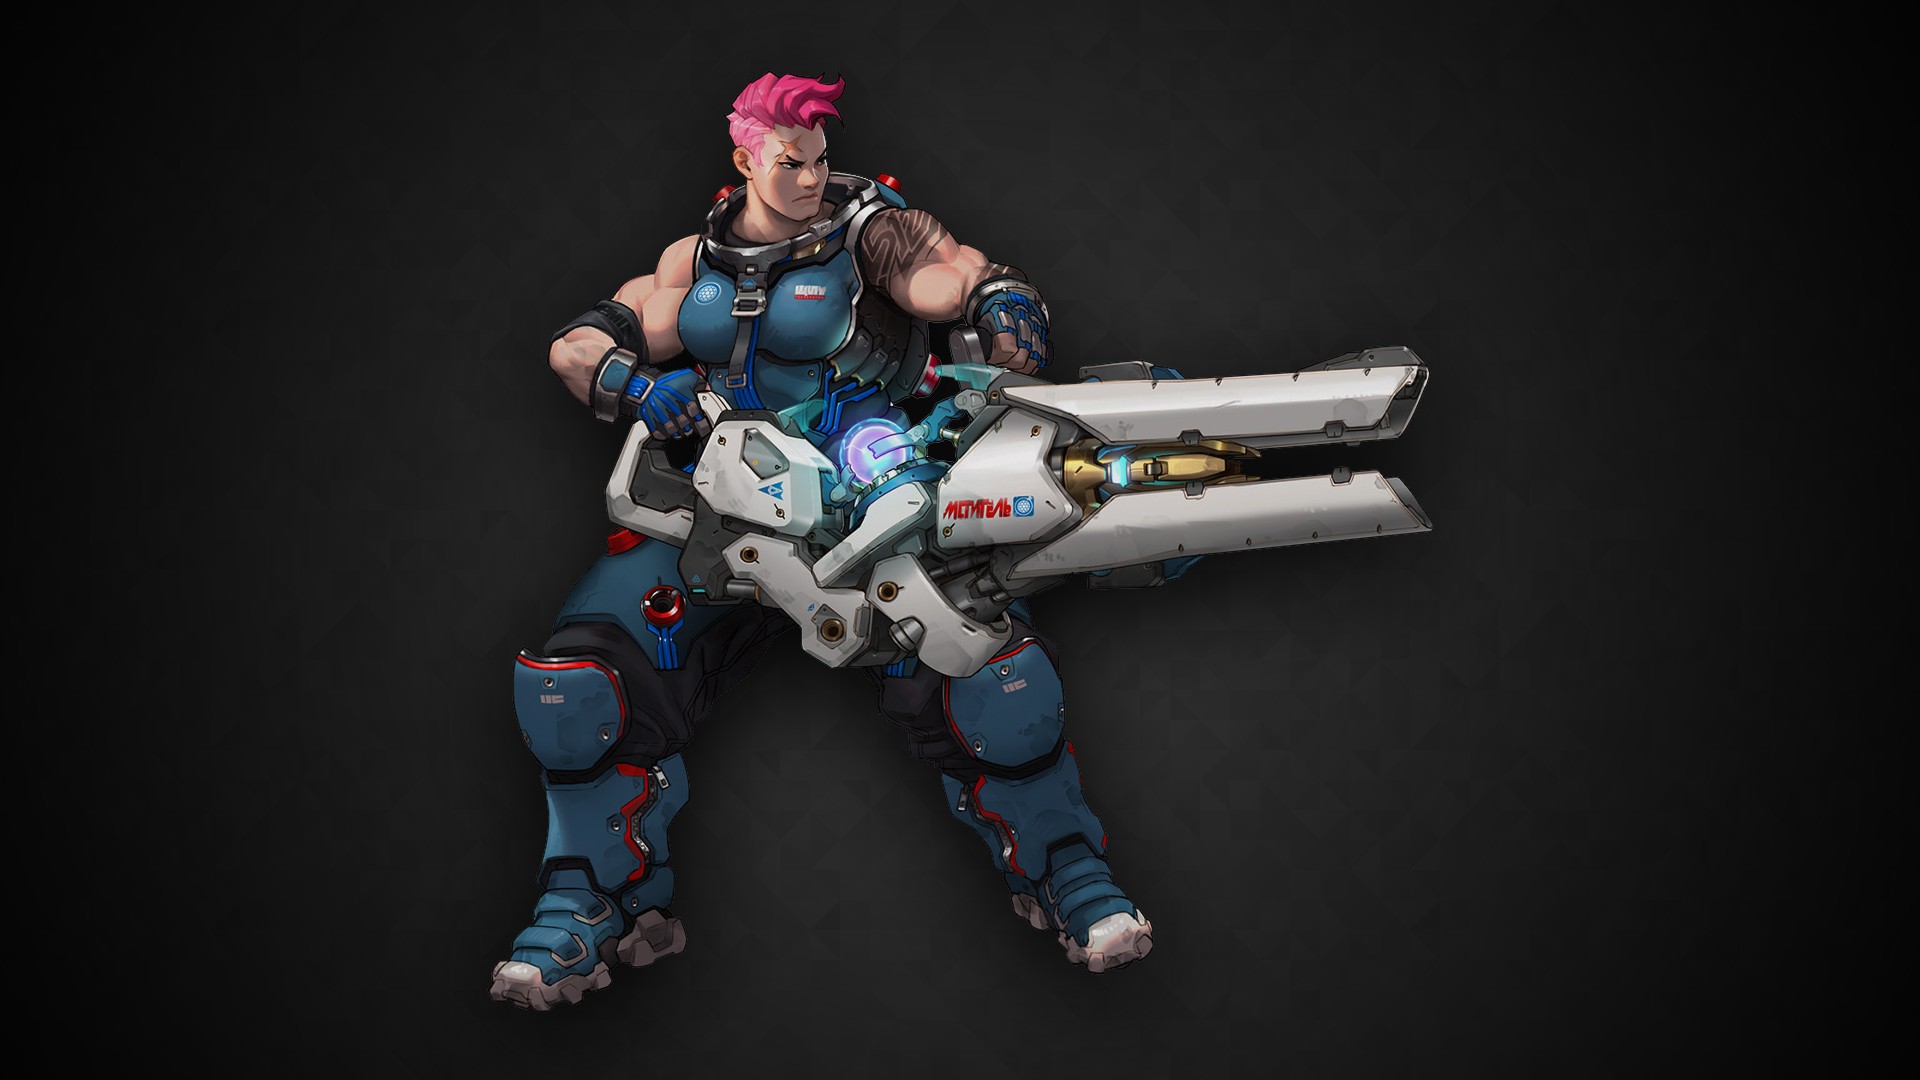 General 1920x1080 Overwatch video games digital art Zarya (Overwatch) PC gaming video game girls Futuristic Weapons girls with guns video game characters